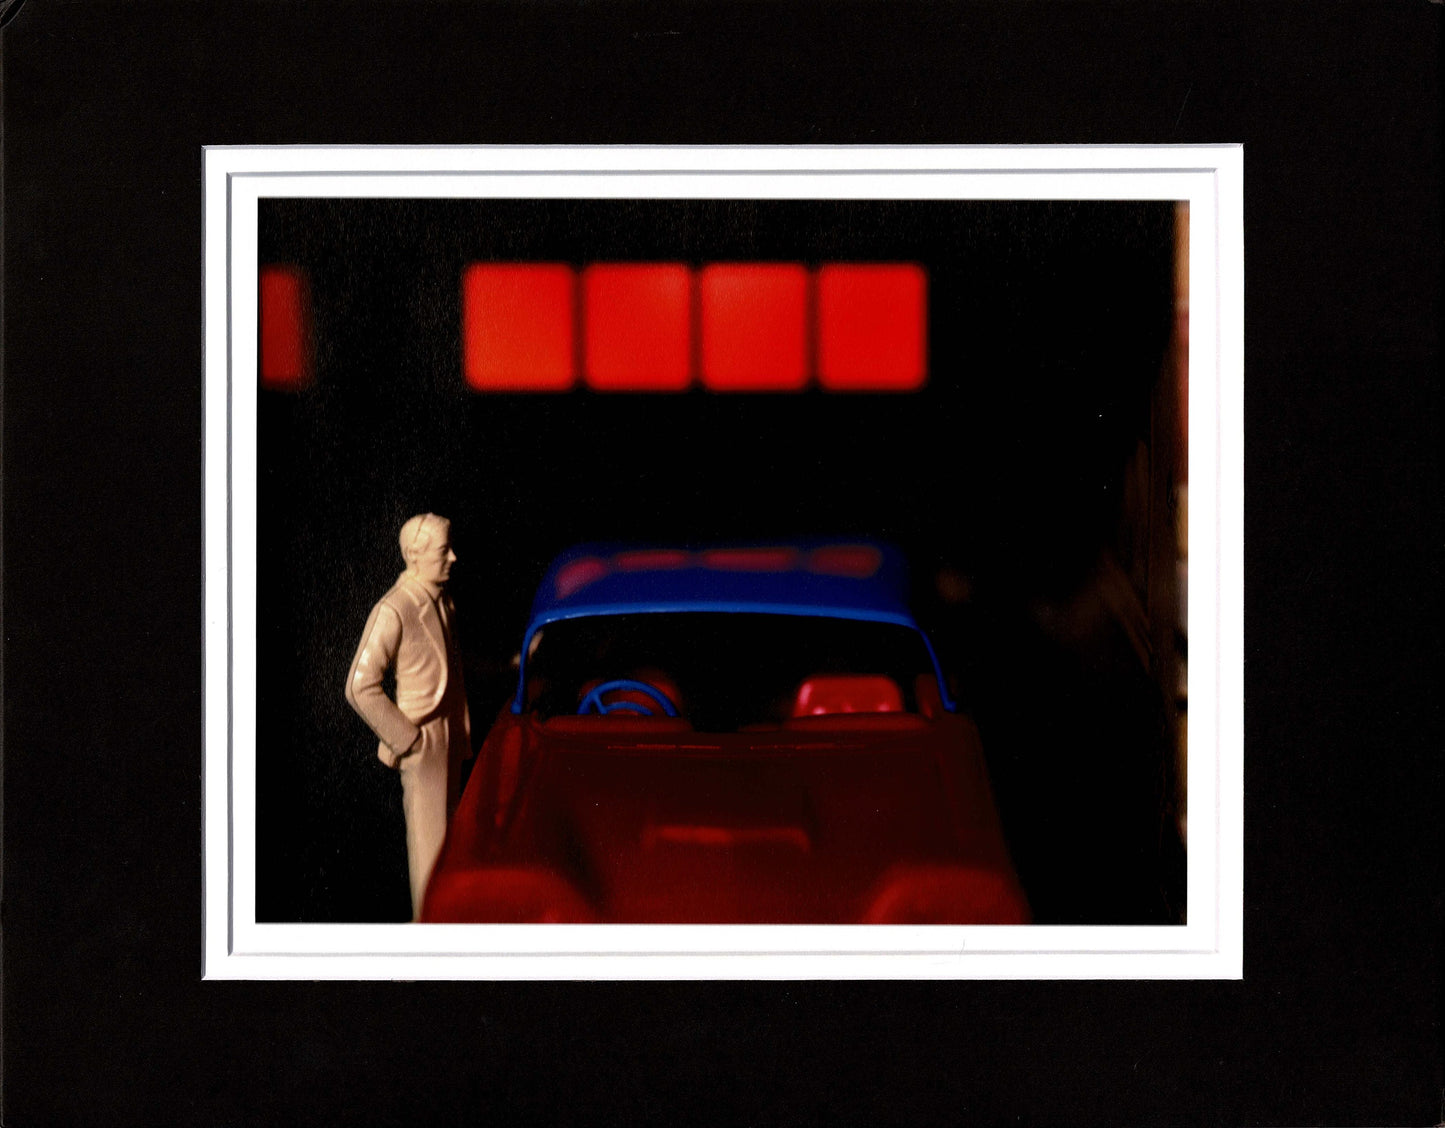 David Levinthal Photograph "Untitled, (from the series Small Wonder), 1996" Giclee Limited Edition Print